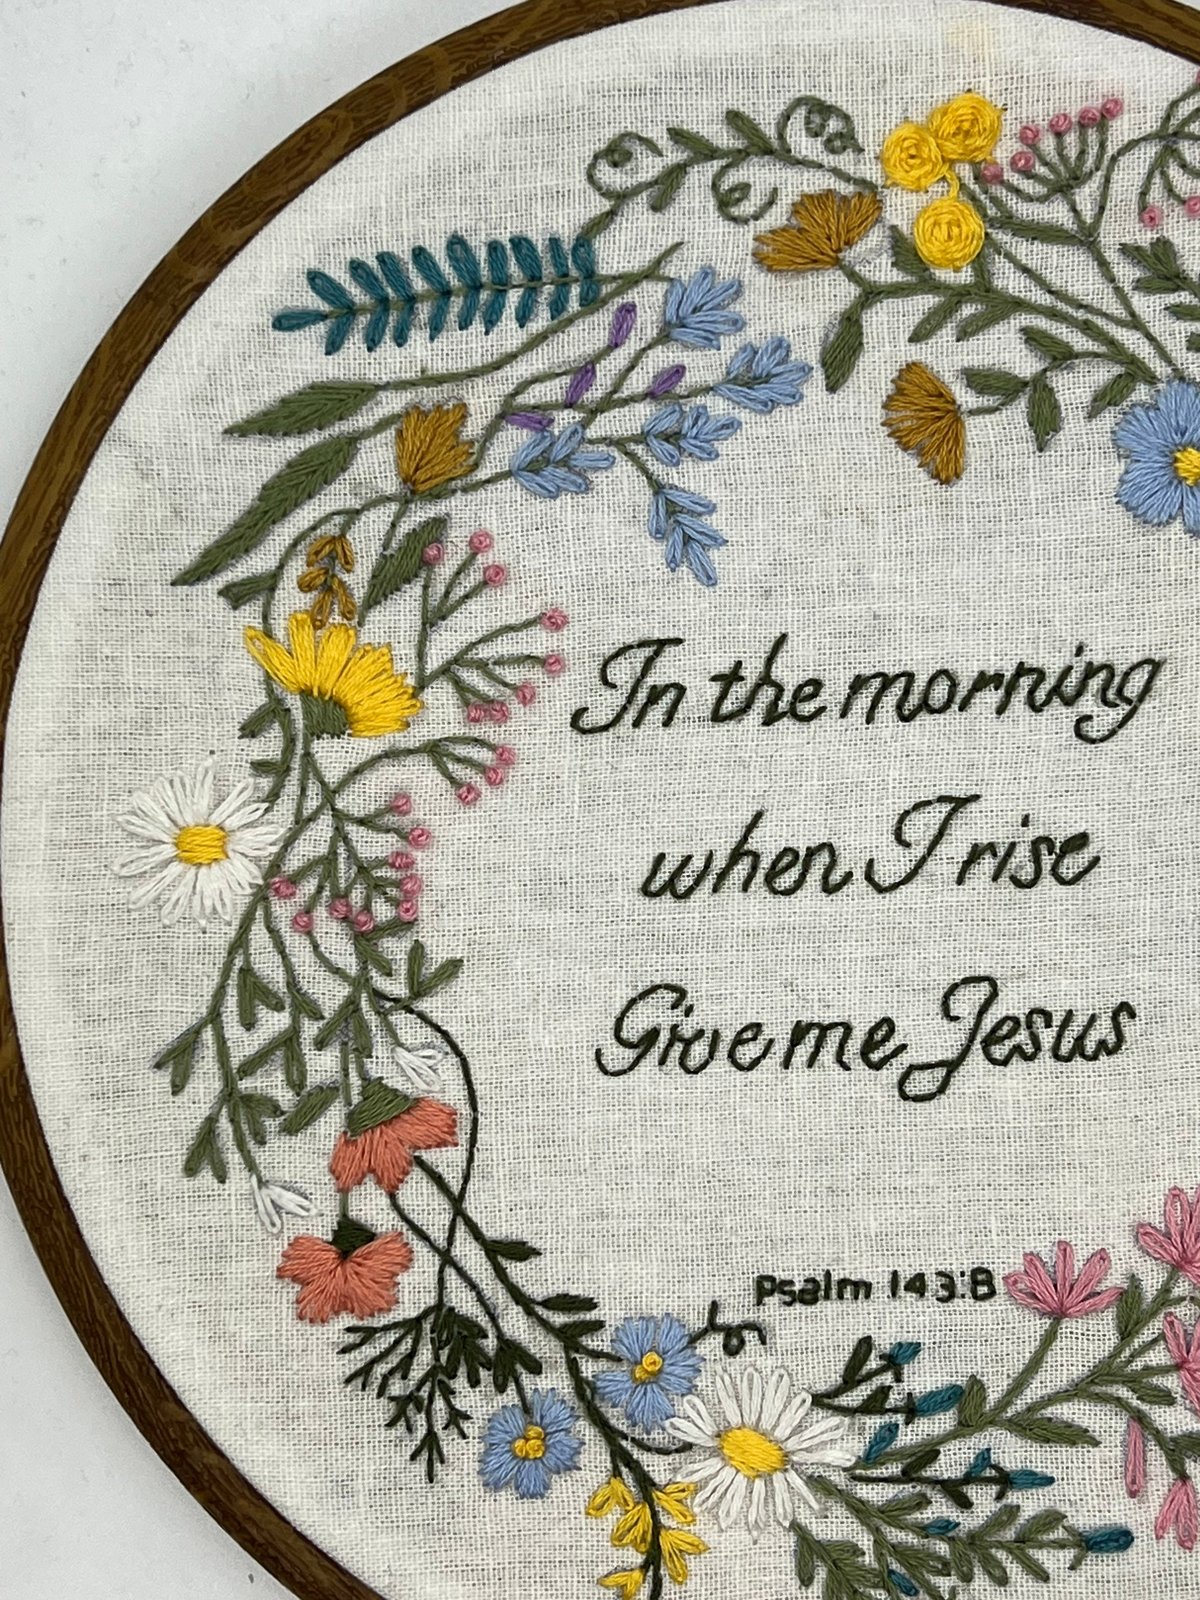 8" Psalm 143 'In the morning when I rise give me Jesus' Embroidery Kit